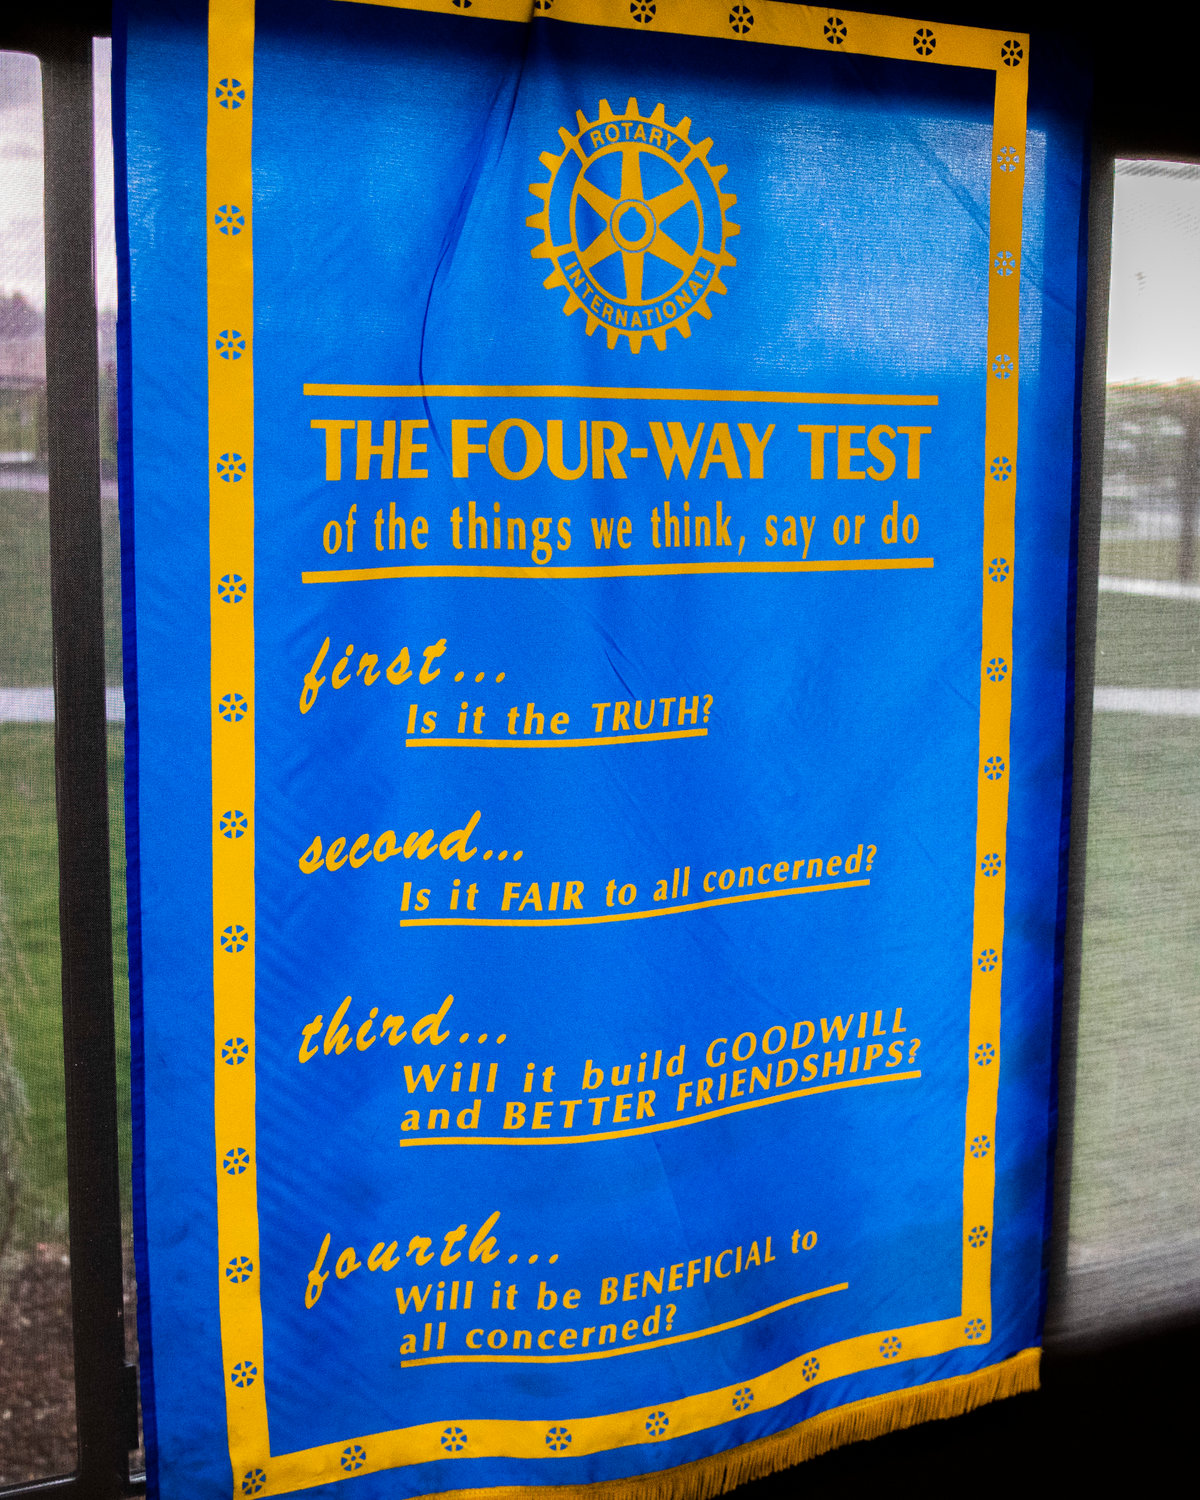 The “Four-Way Test,” sits on display during a Chehalis Rotary Club meeting inside the Virgil R. Lee Community Building in Chehalis on Wednesday.